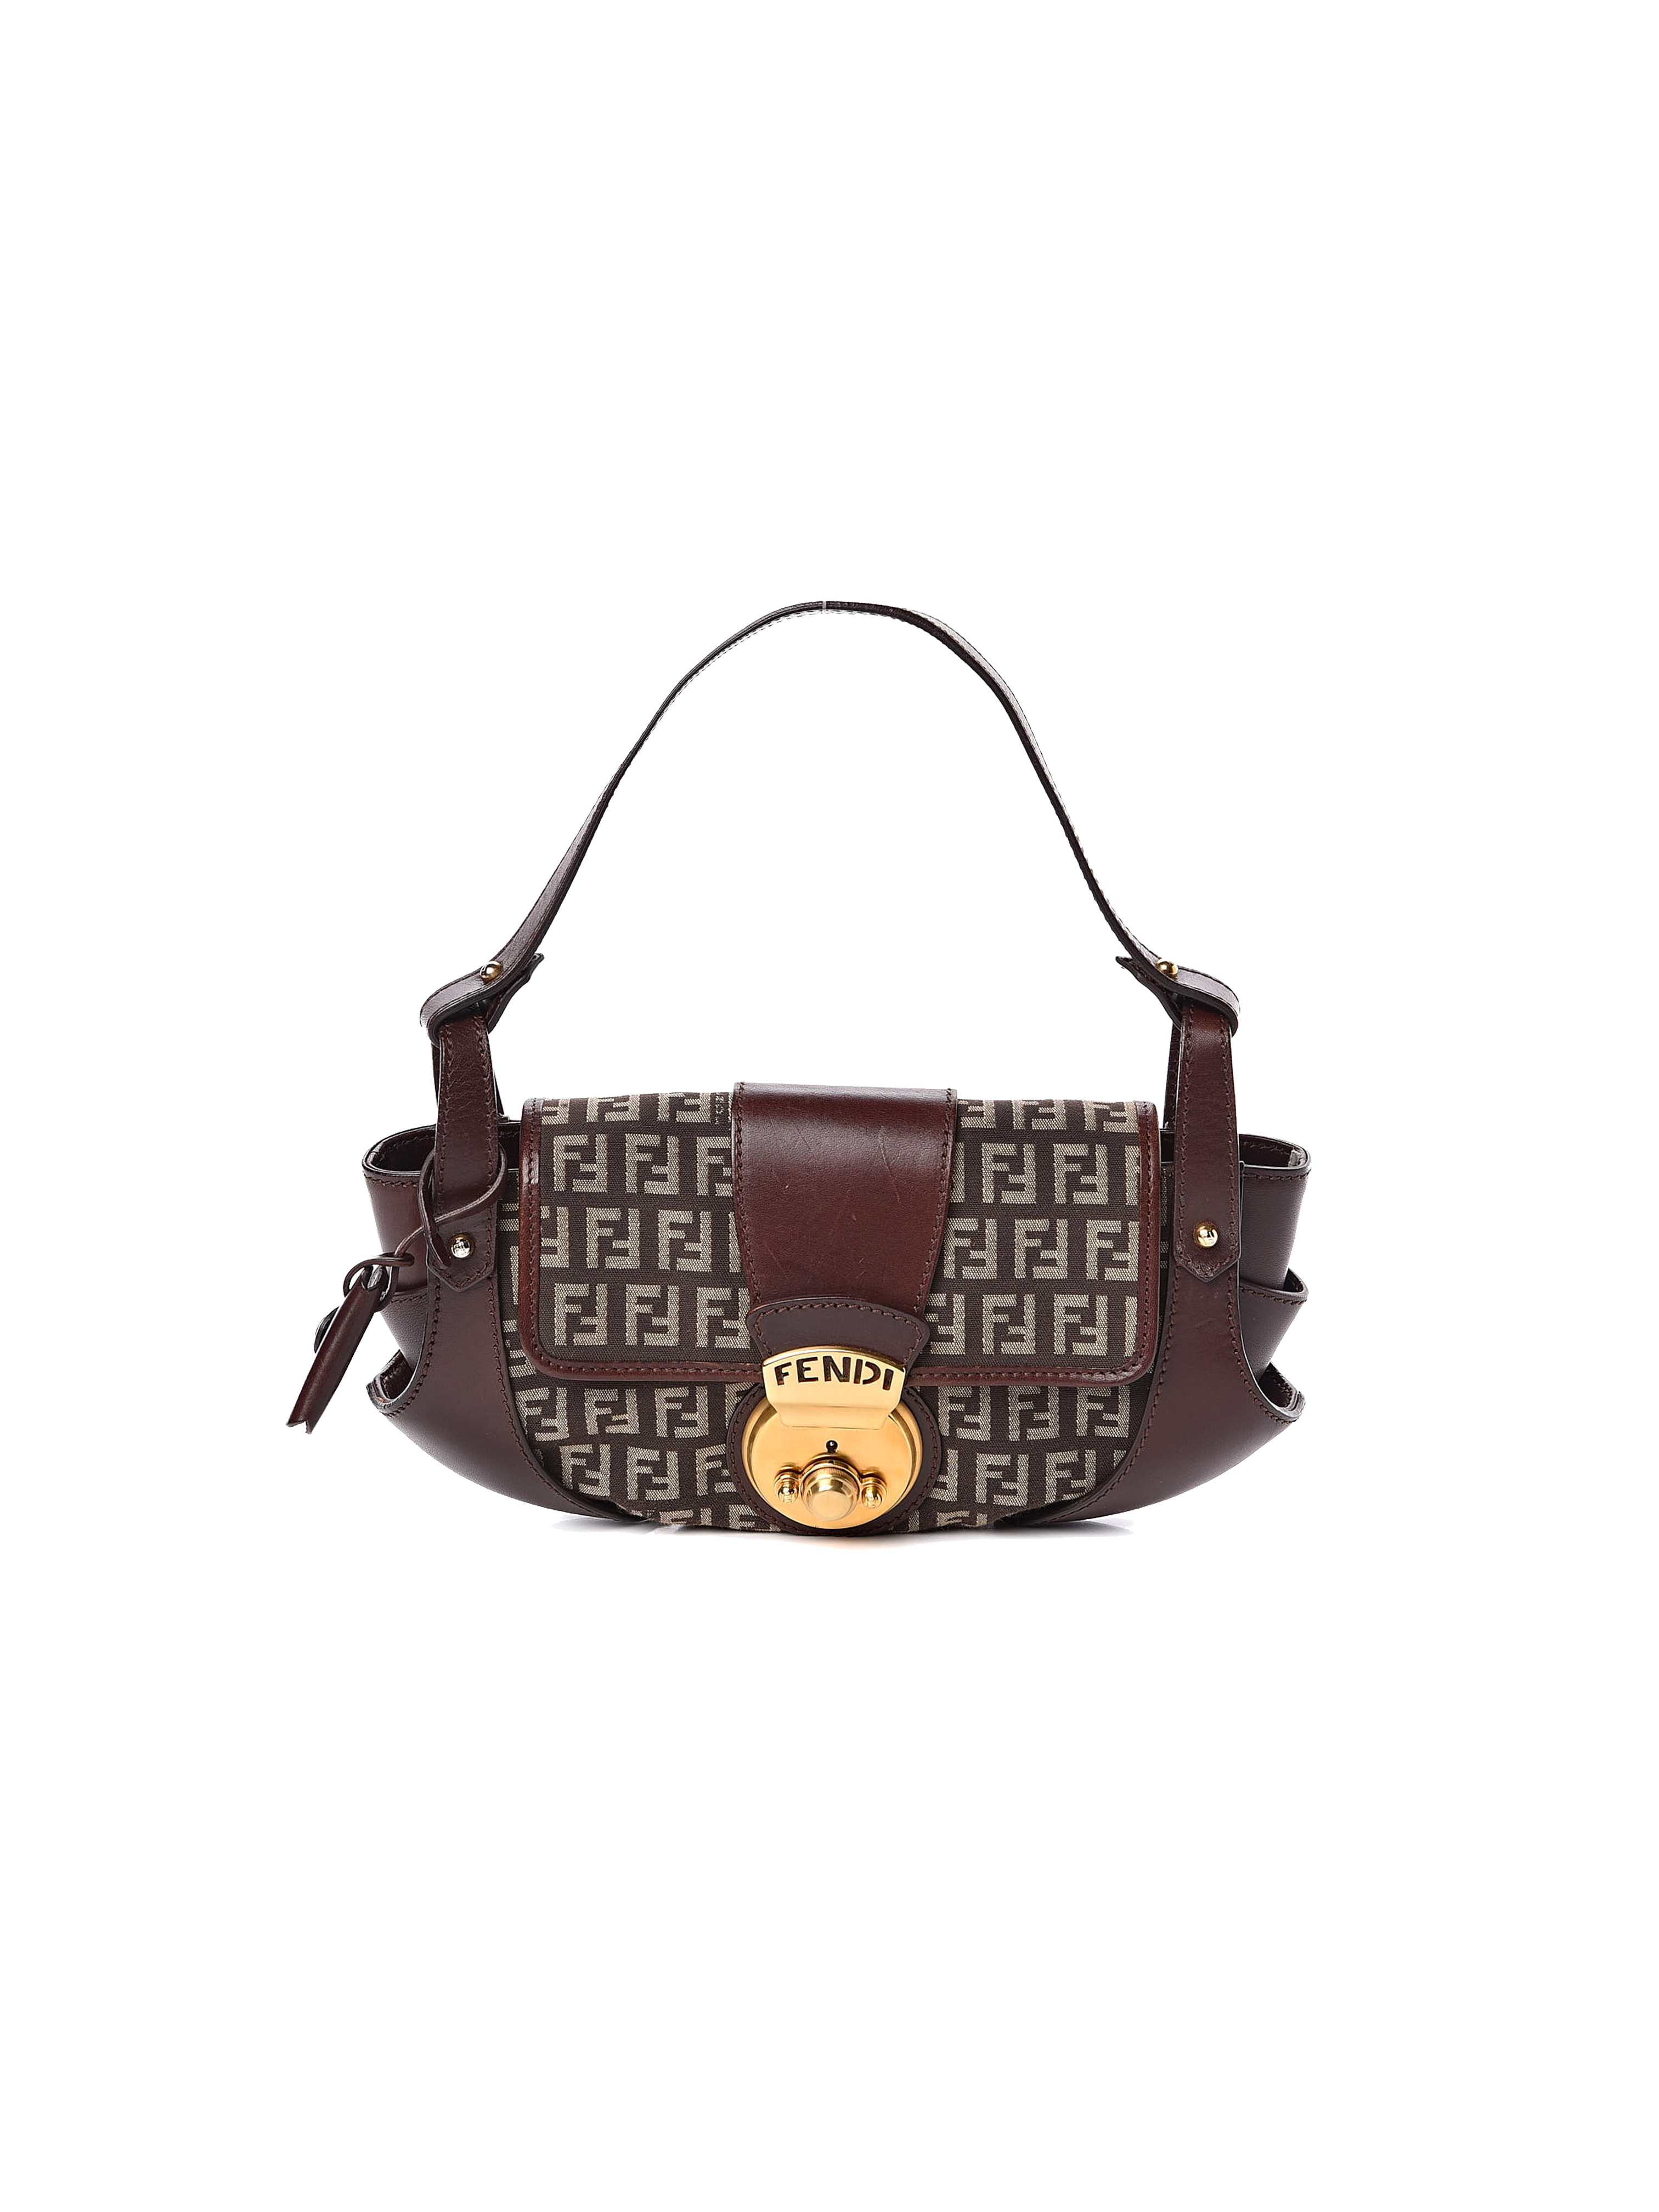 Fendi Bags Throughout the Years – CR Fashion Book